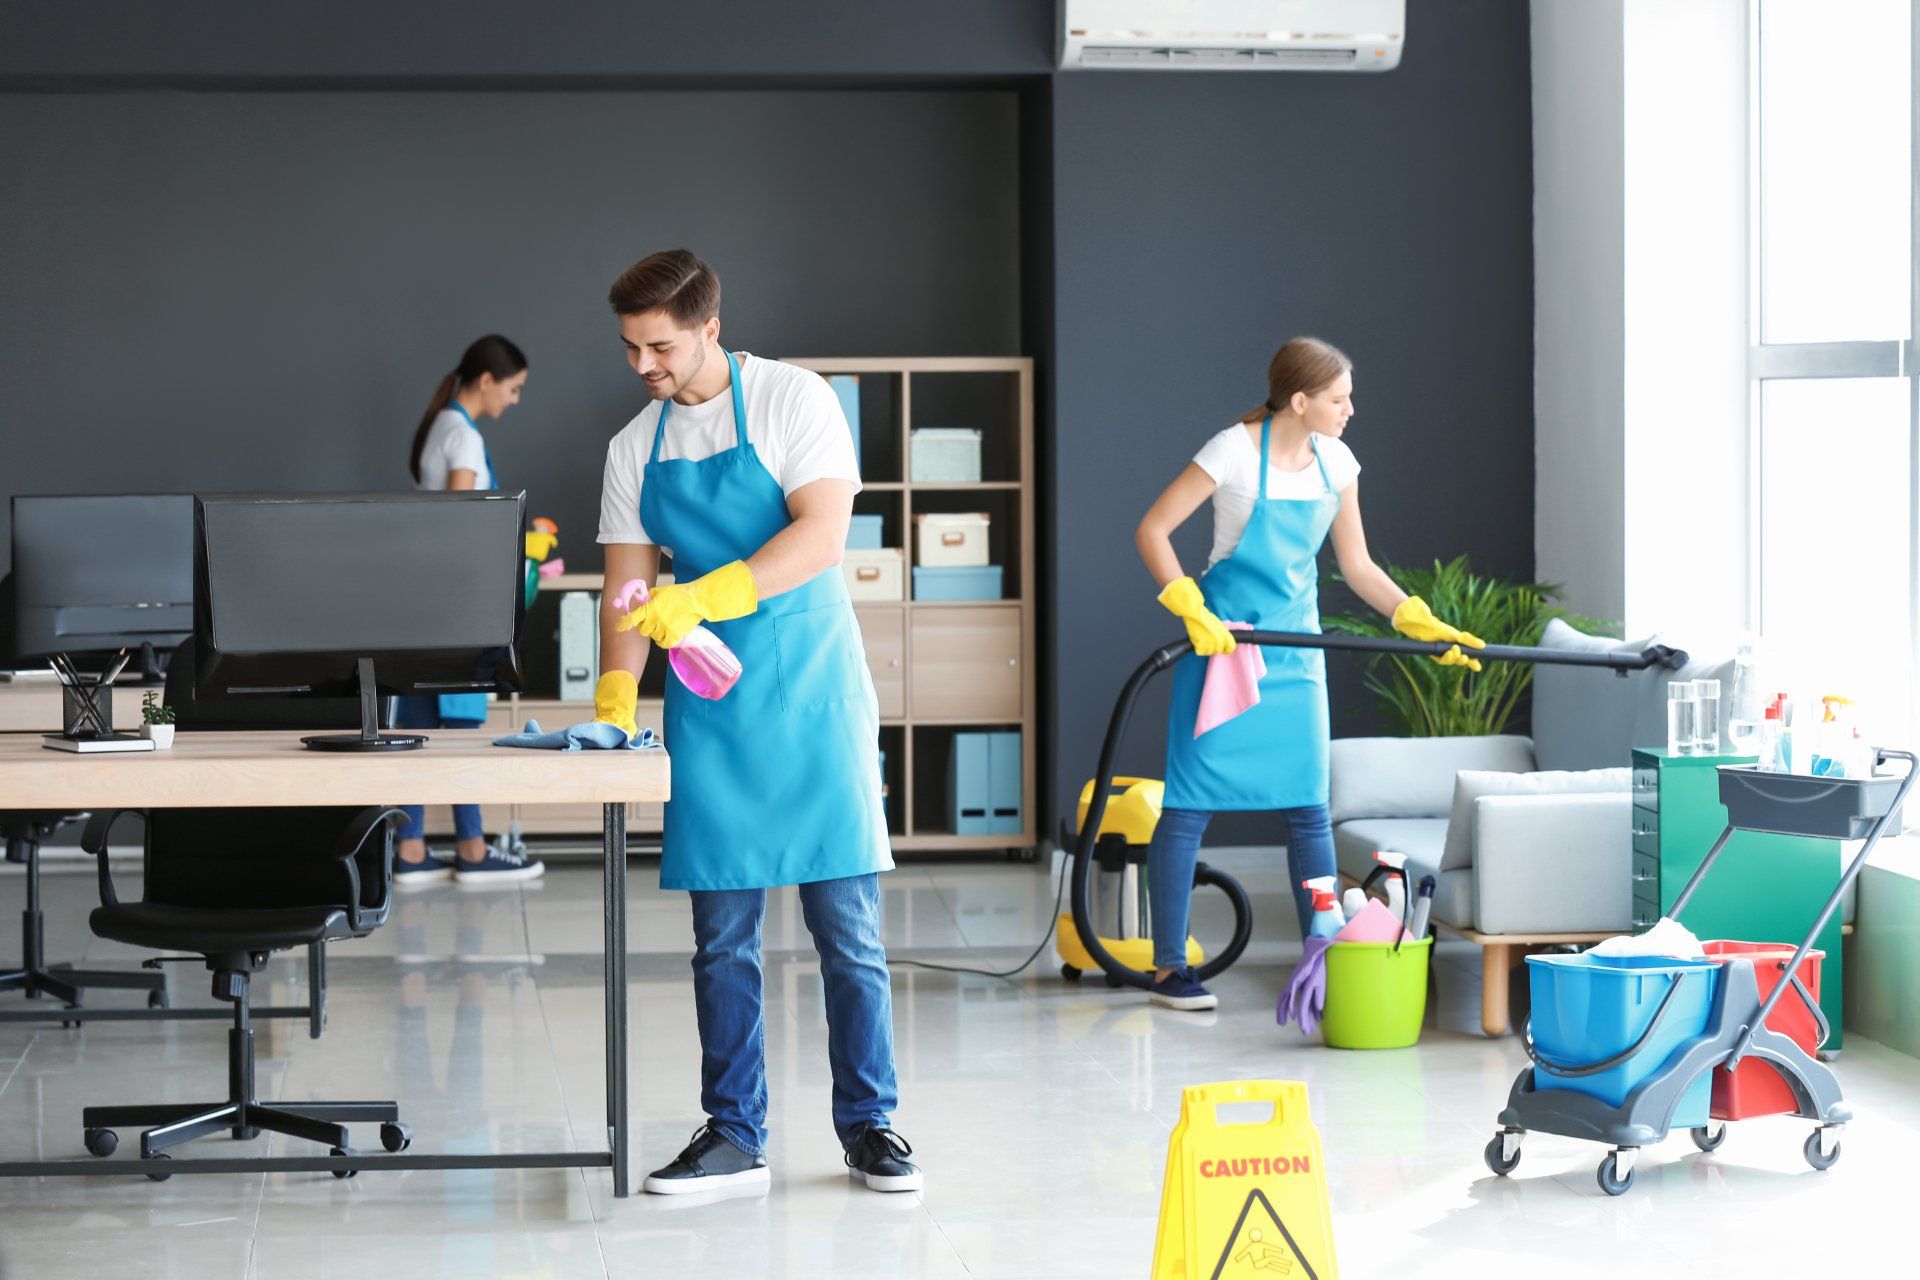 Group of cleaners cleaning office — Cleaning Services in Airlie Beach, QLD